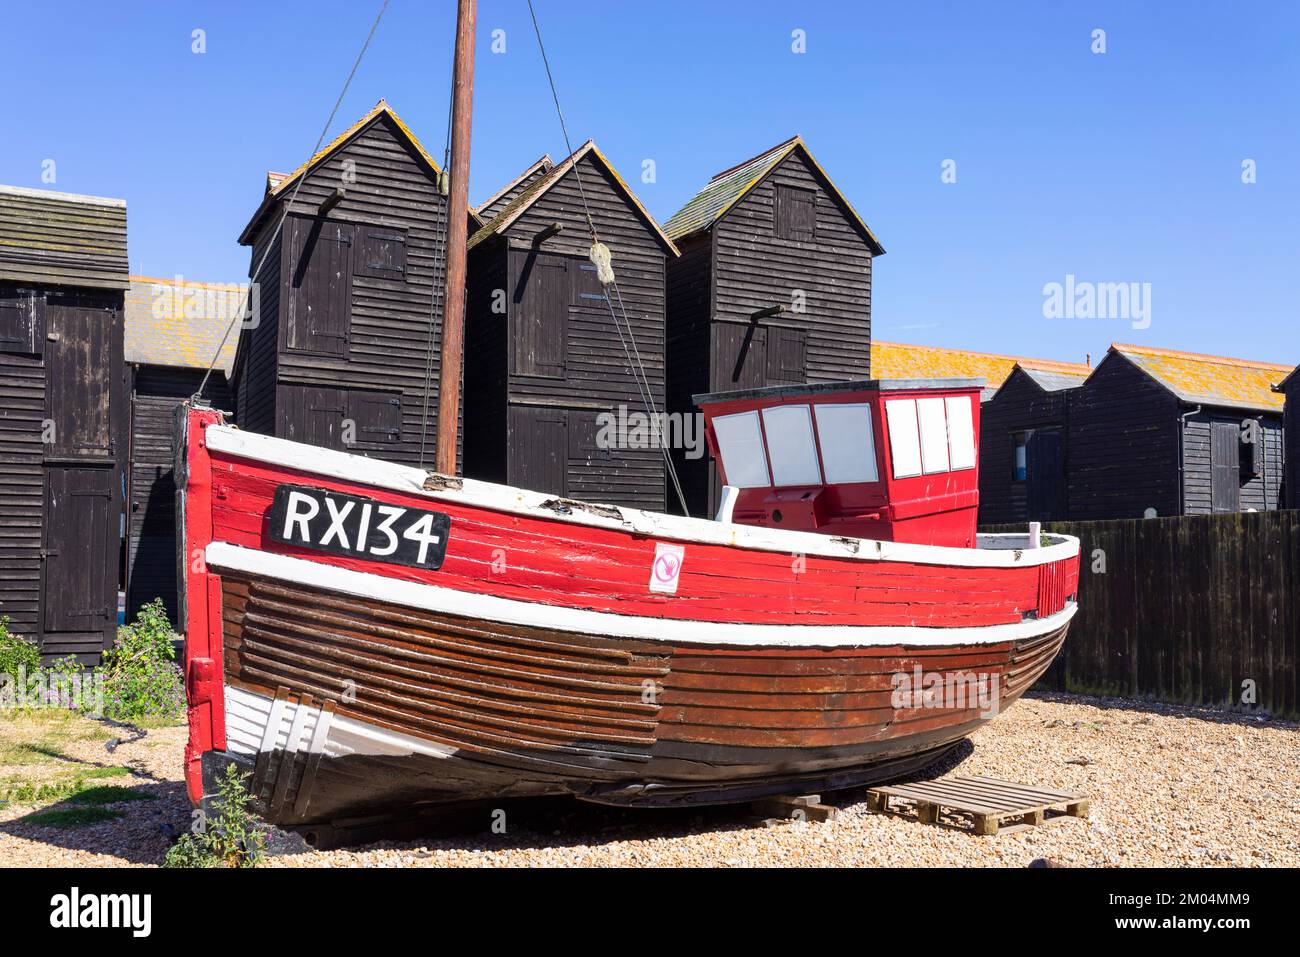 Hastings Fishermen's Museum e tradizionali capanne a rete nera Hasting's Net Shops on the Stade Hastings Old Town Hastings East Sussex England UK GB Foto Stock